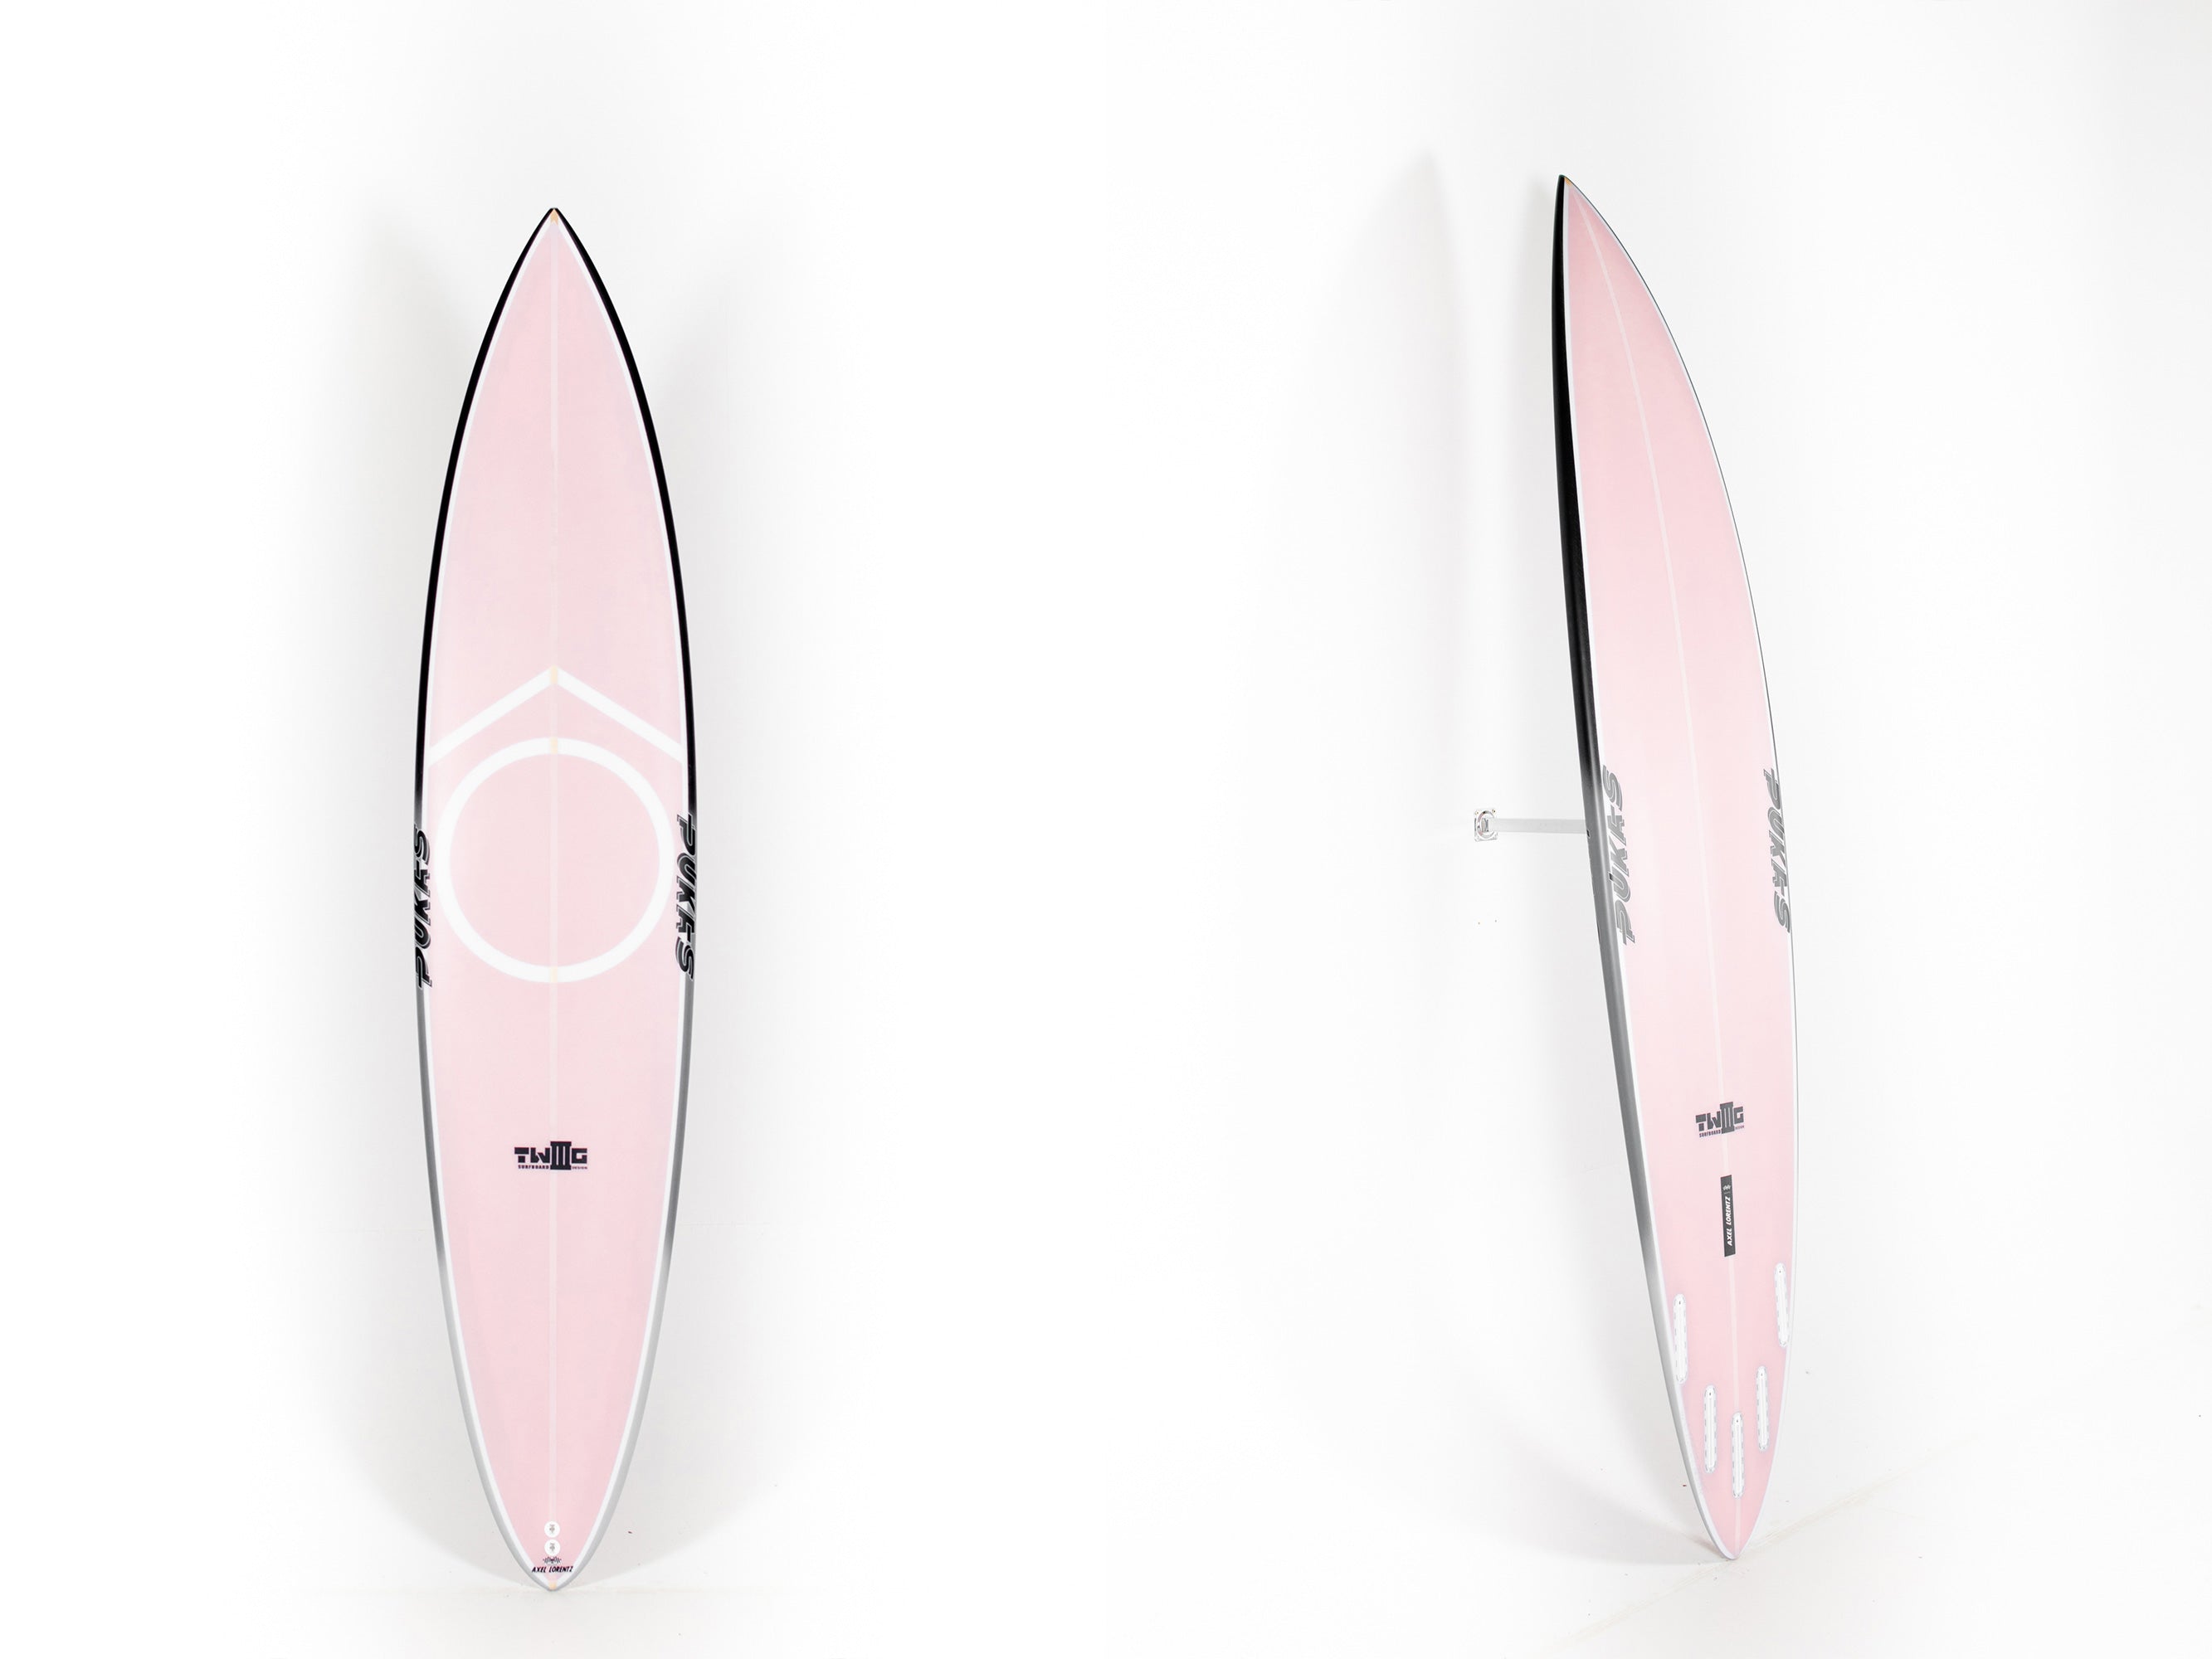 Pukas Surfboard - TWIG CHARGER by Axel Lorentz - 8´0” x 20,13 x 3,25 - 52,55L  AX06173